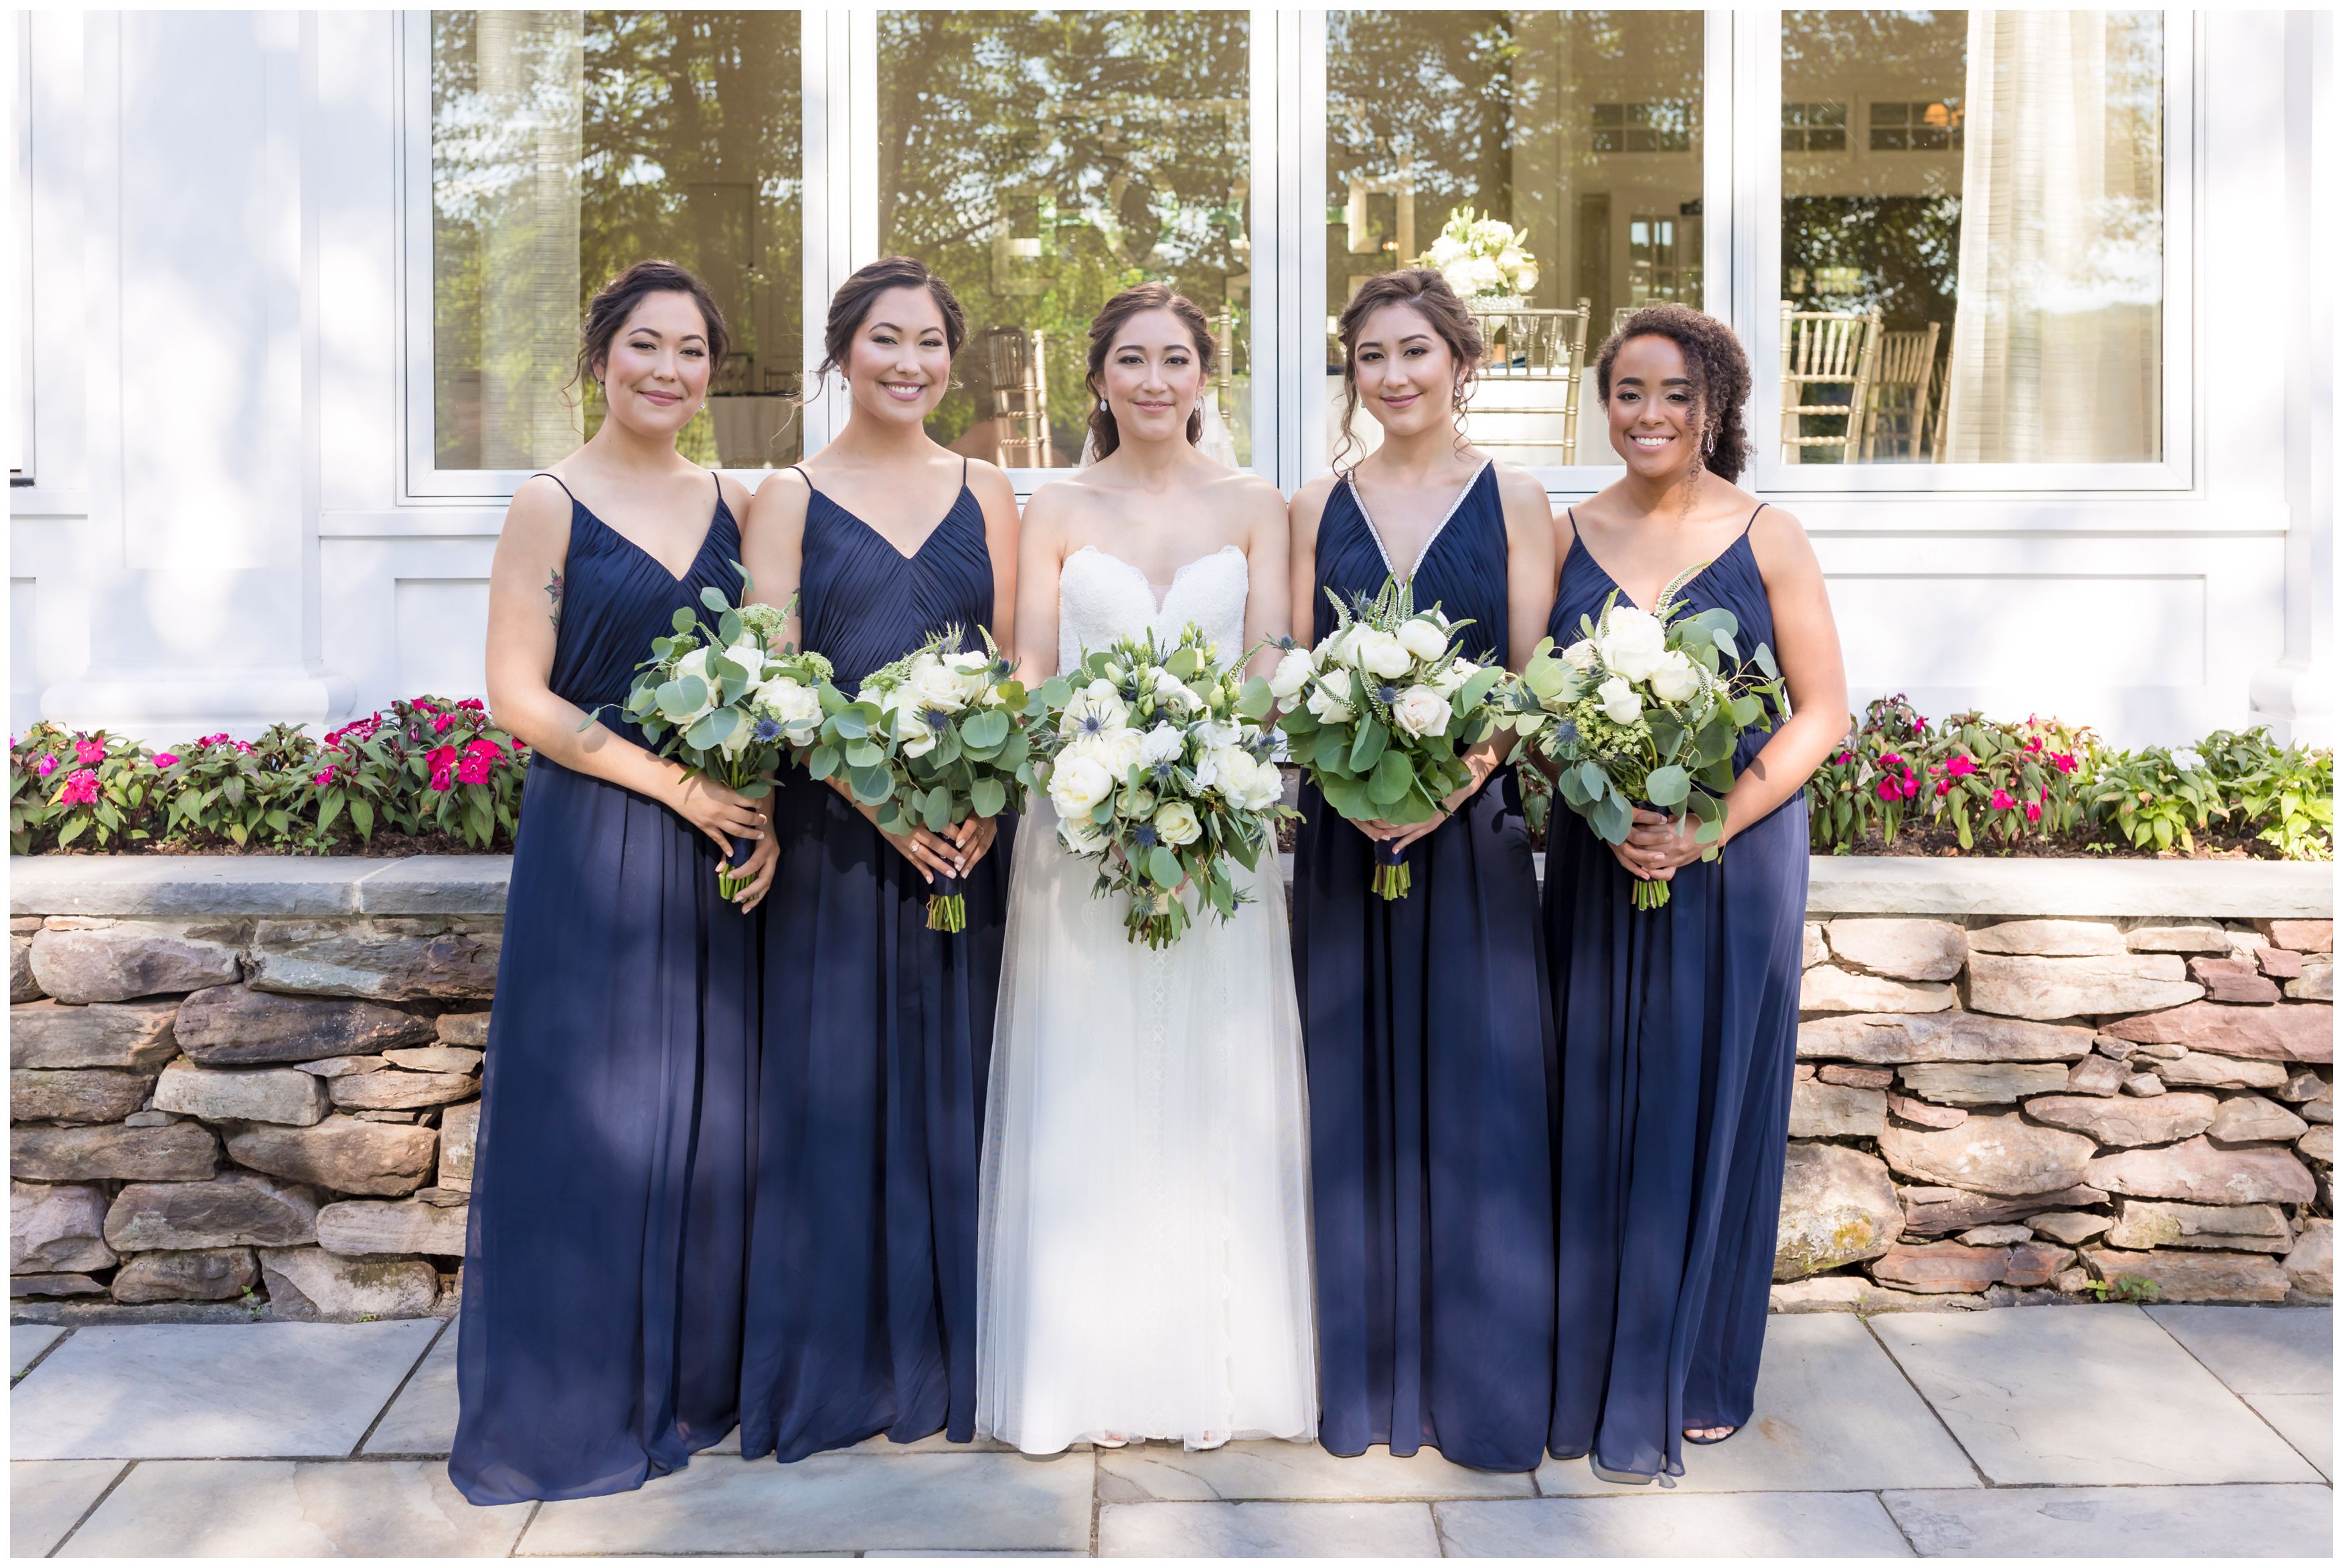 Bridal Party at Indian Trail club with large white peonies and white roses bride bouquet with navy bridesmaids and white roses bouquets